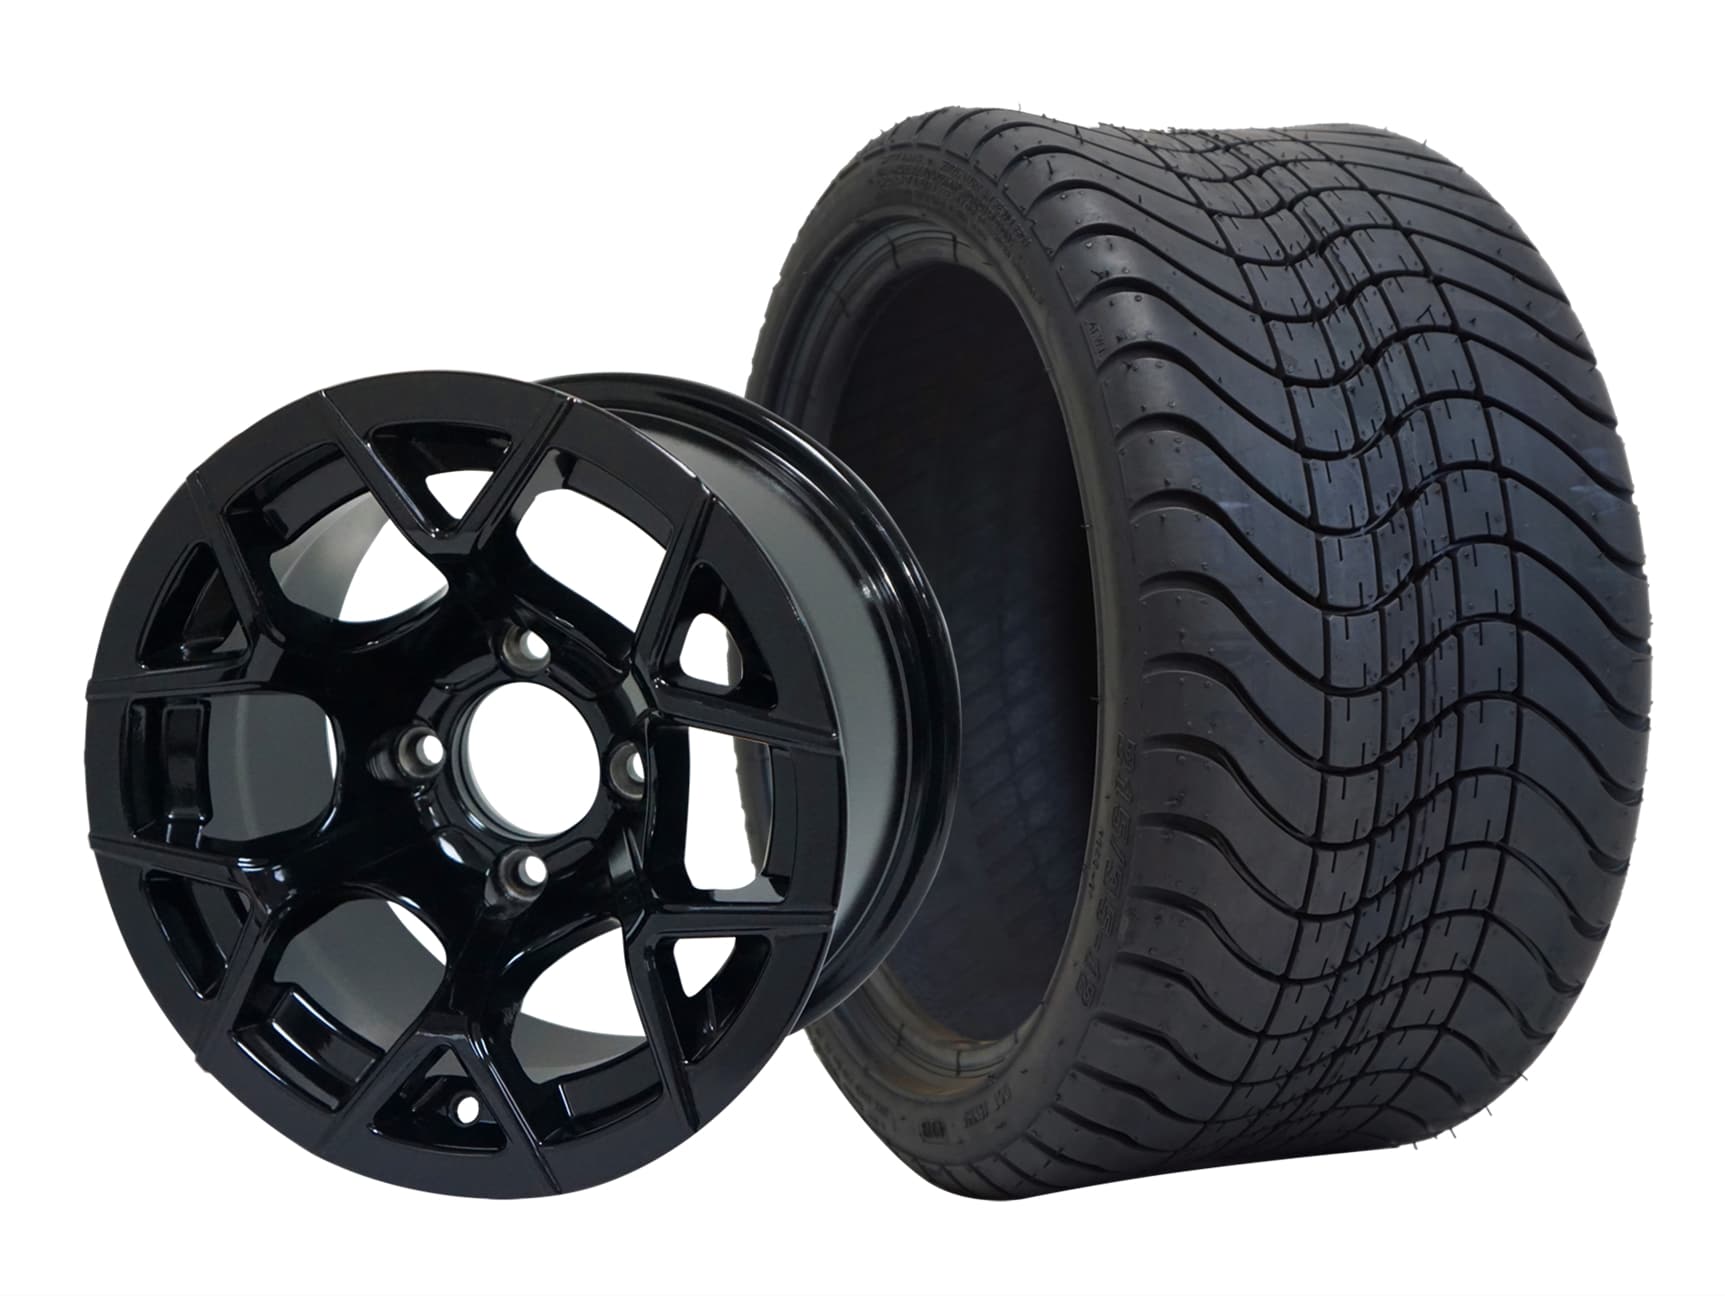 BNDL-TR1212-WH1227-CC0002-LN0005 12″ RALLY GLOSSY BLACK WHEEL – ALUMINUM ALLOY / STEELENG 215/35-12 LOW PROFILE TIRE